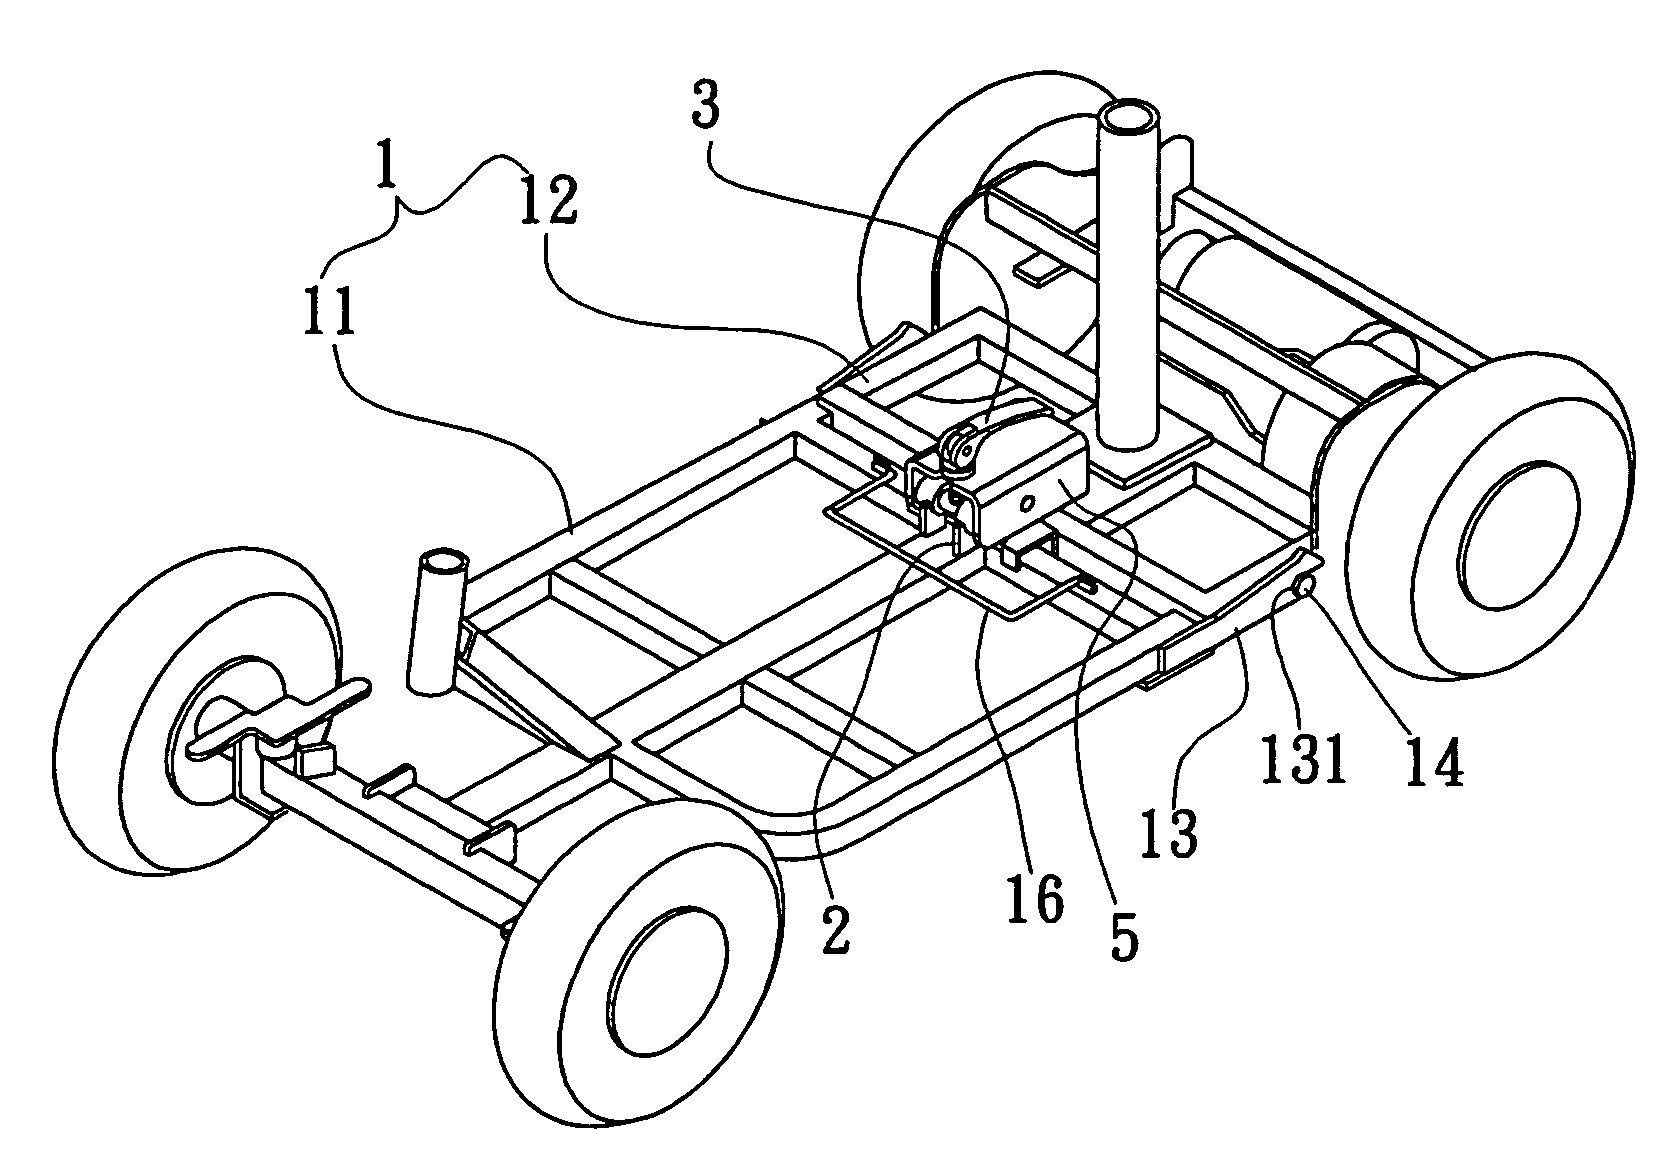 Structure of a frame of an electric cart for a person to ride on